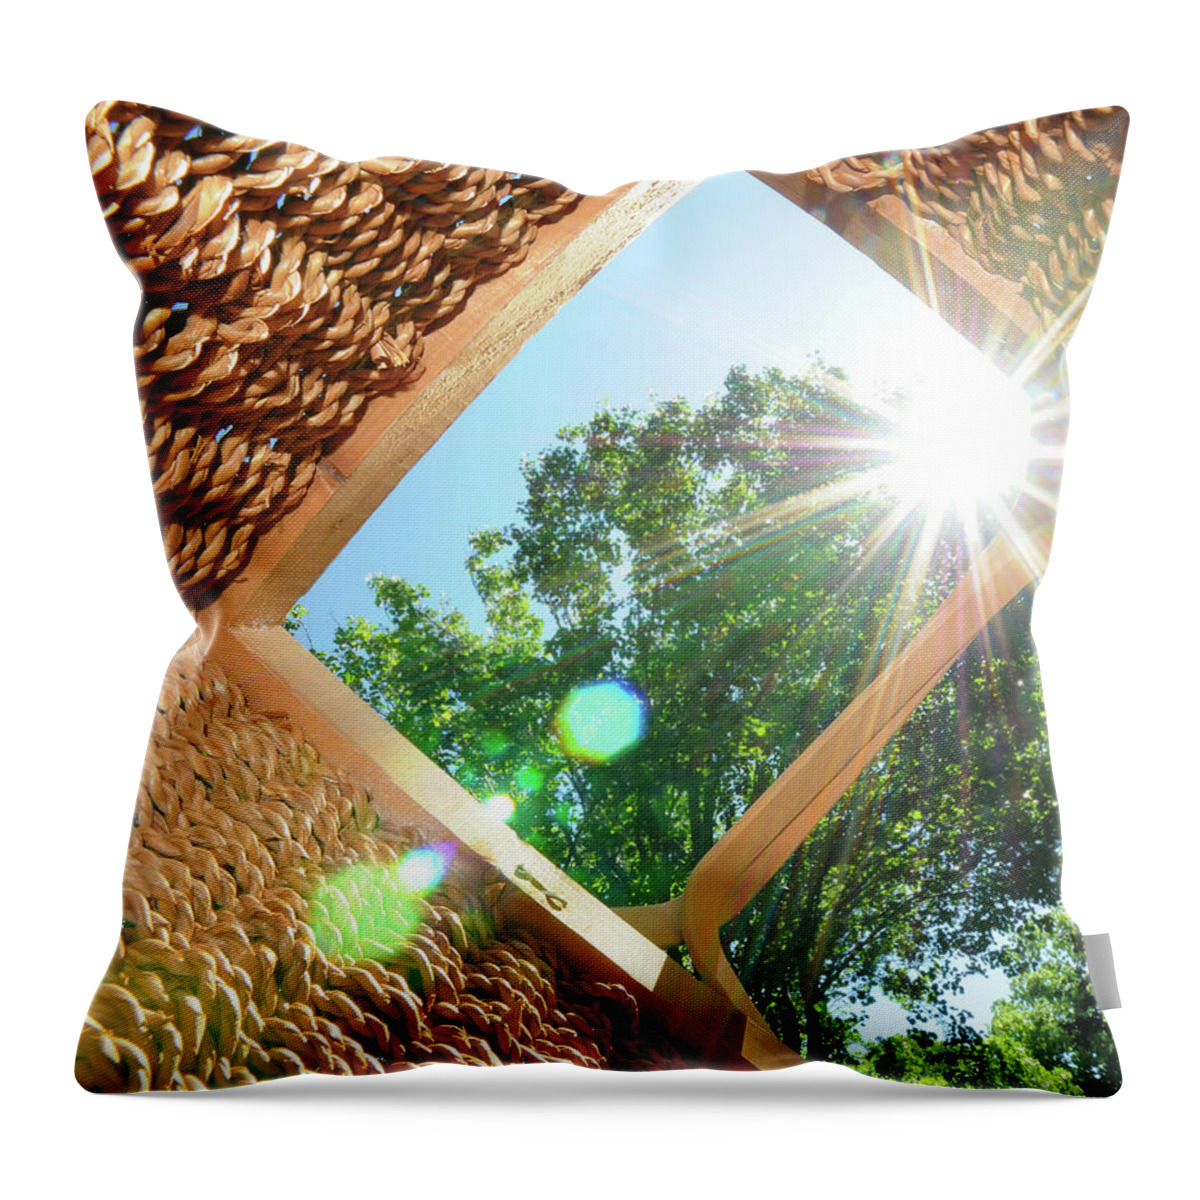 Picnic Throw Pillow featuring the photograph Inside the Picnic basket by Ted Keller